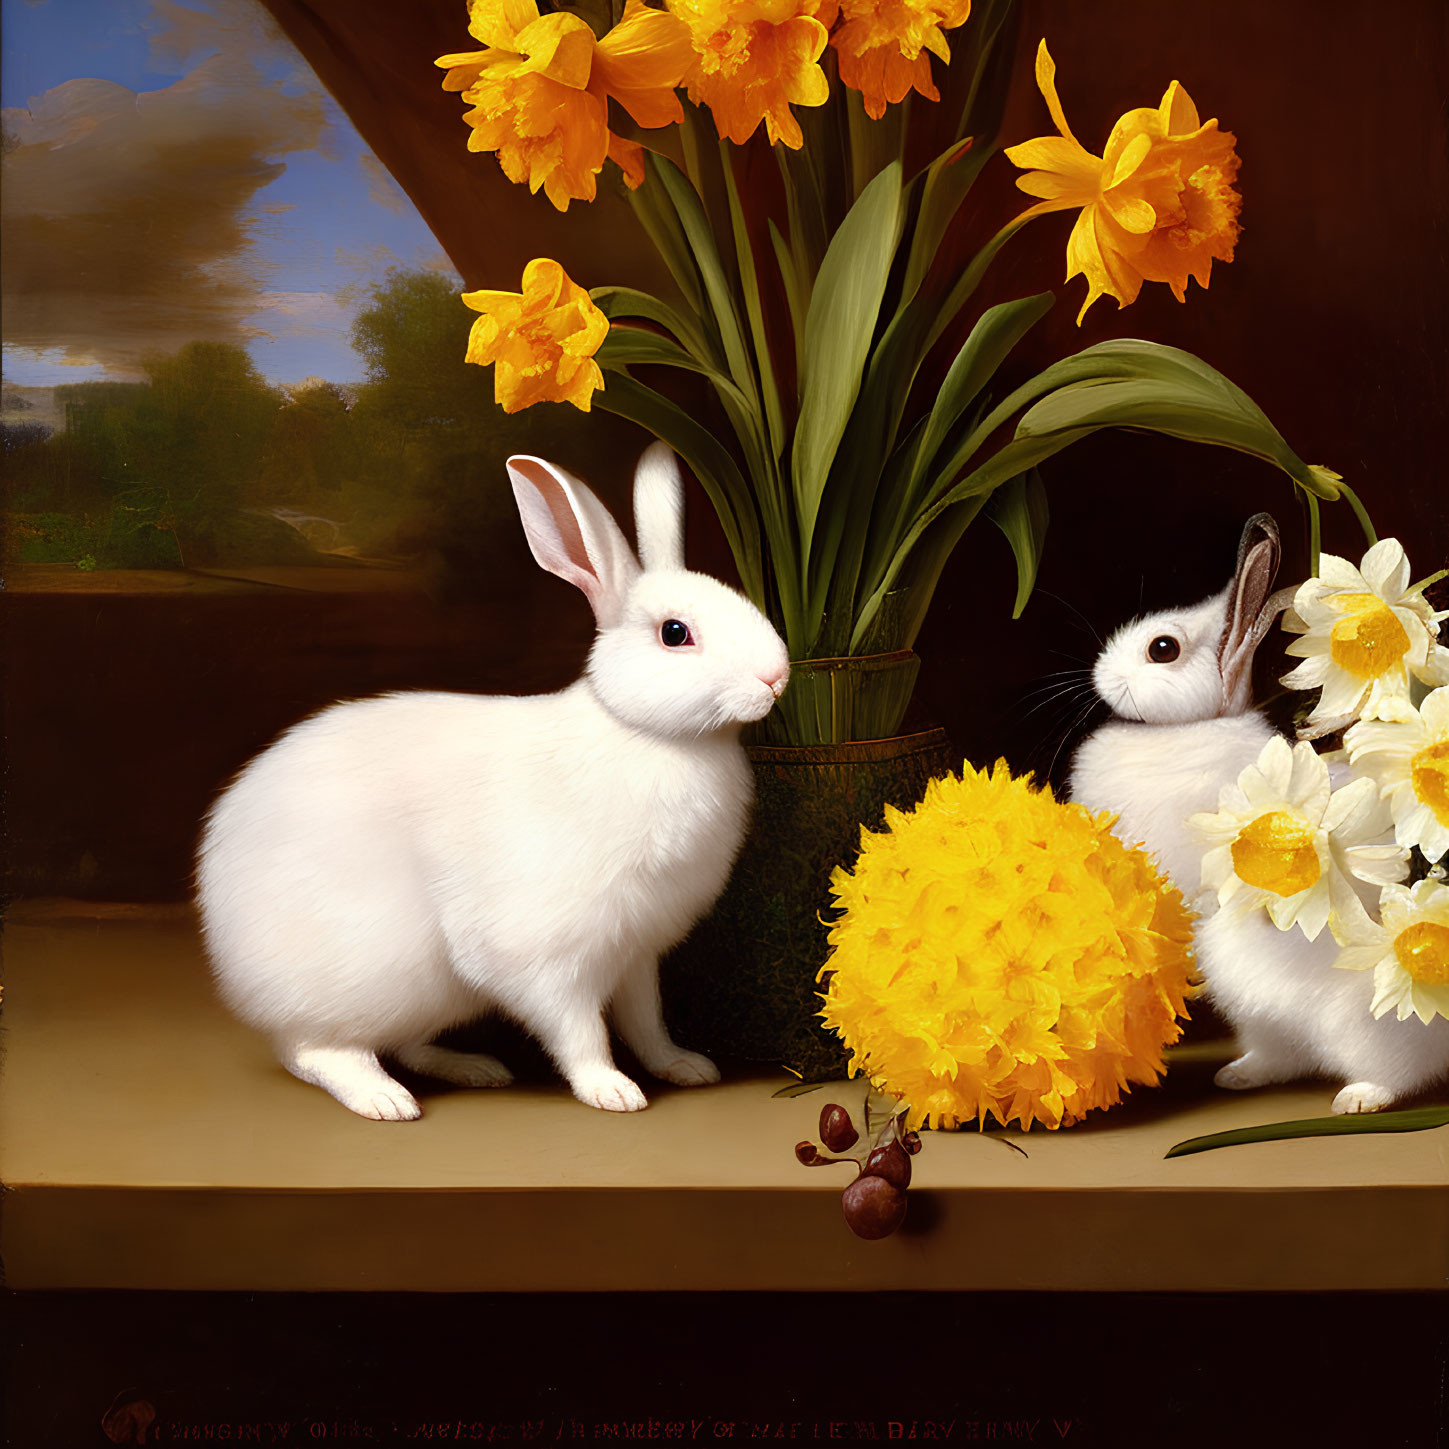 Still life painting: daffodils, rabbits, chestnuts on wooden surface